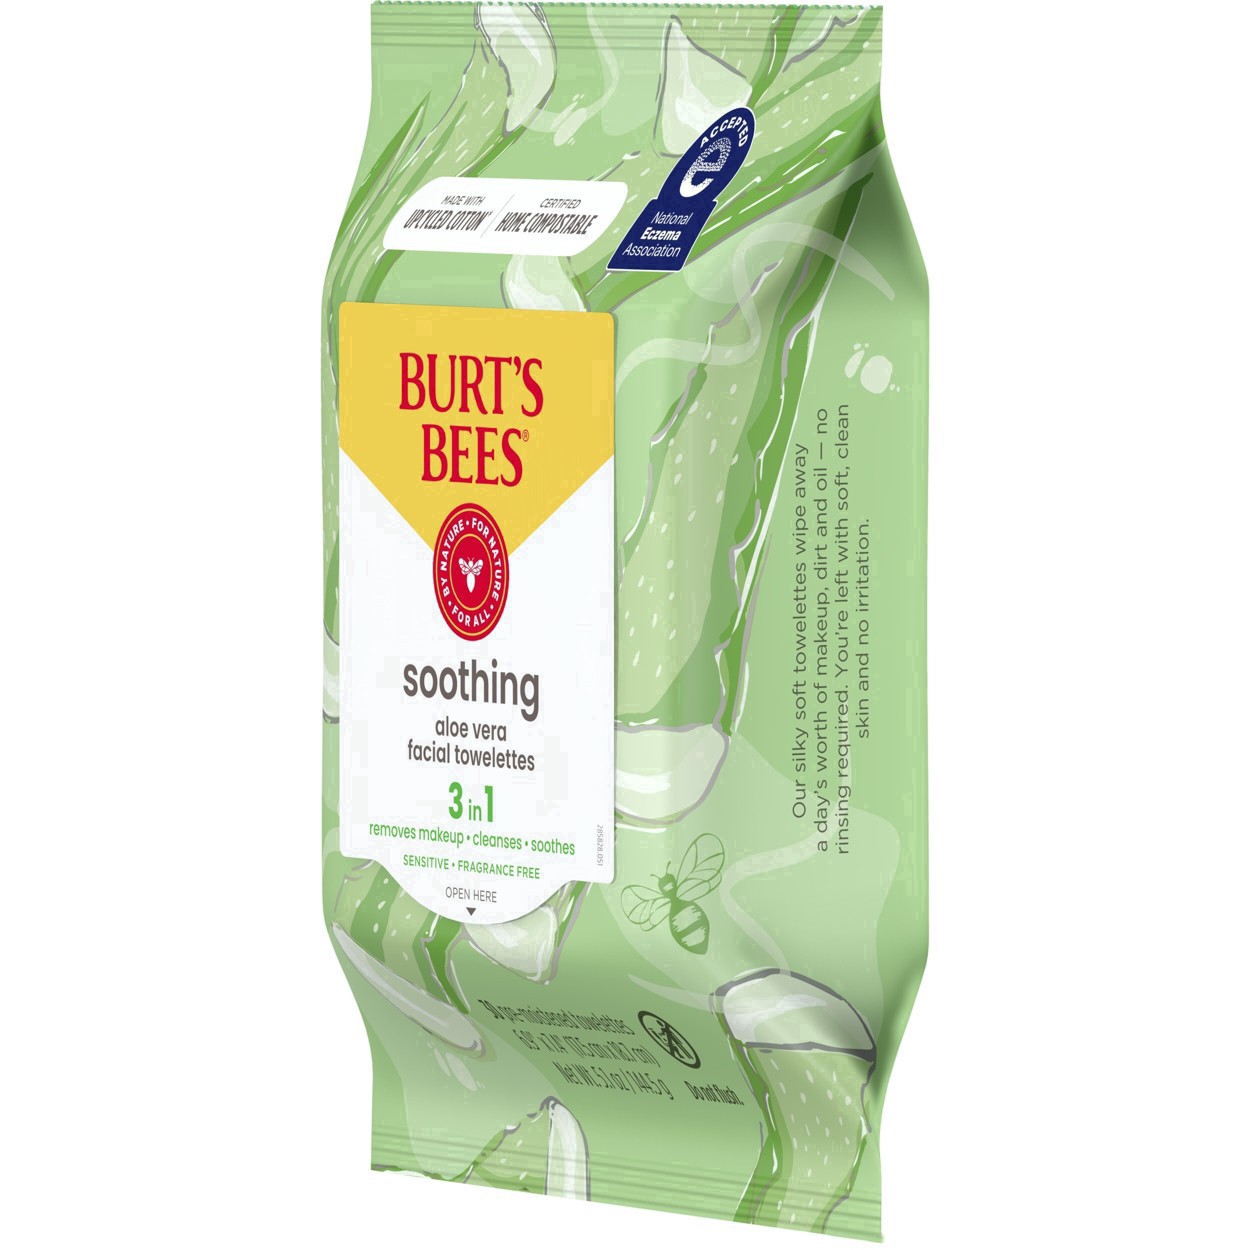 slide 89 of 137, Burt's Bees Soothing Facial Cleanser and Makeup Remover Towelettes with Aloe Vera for Sensitive Skin, Made with Upcycled Cotton, 30 Count, 30 ct